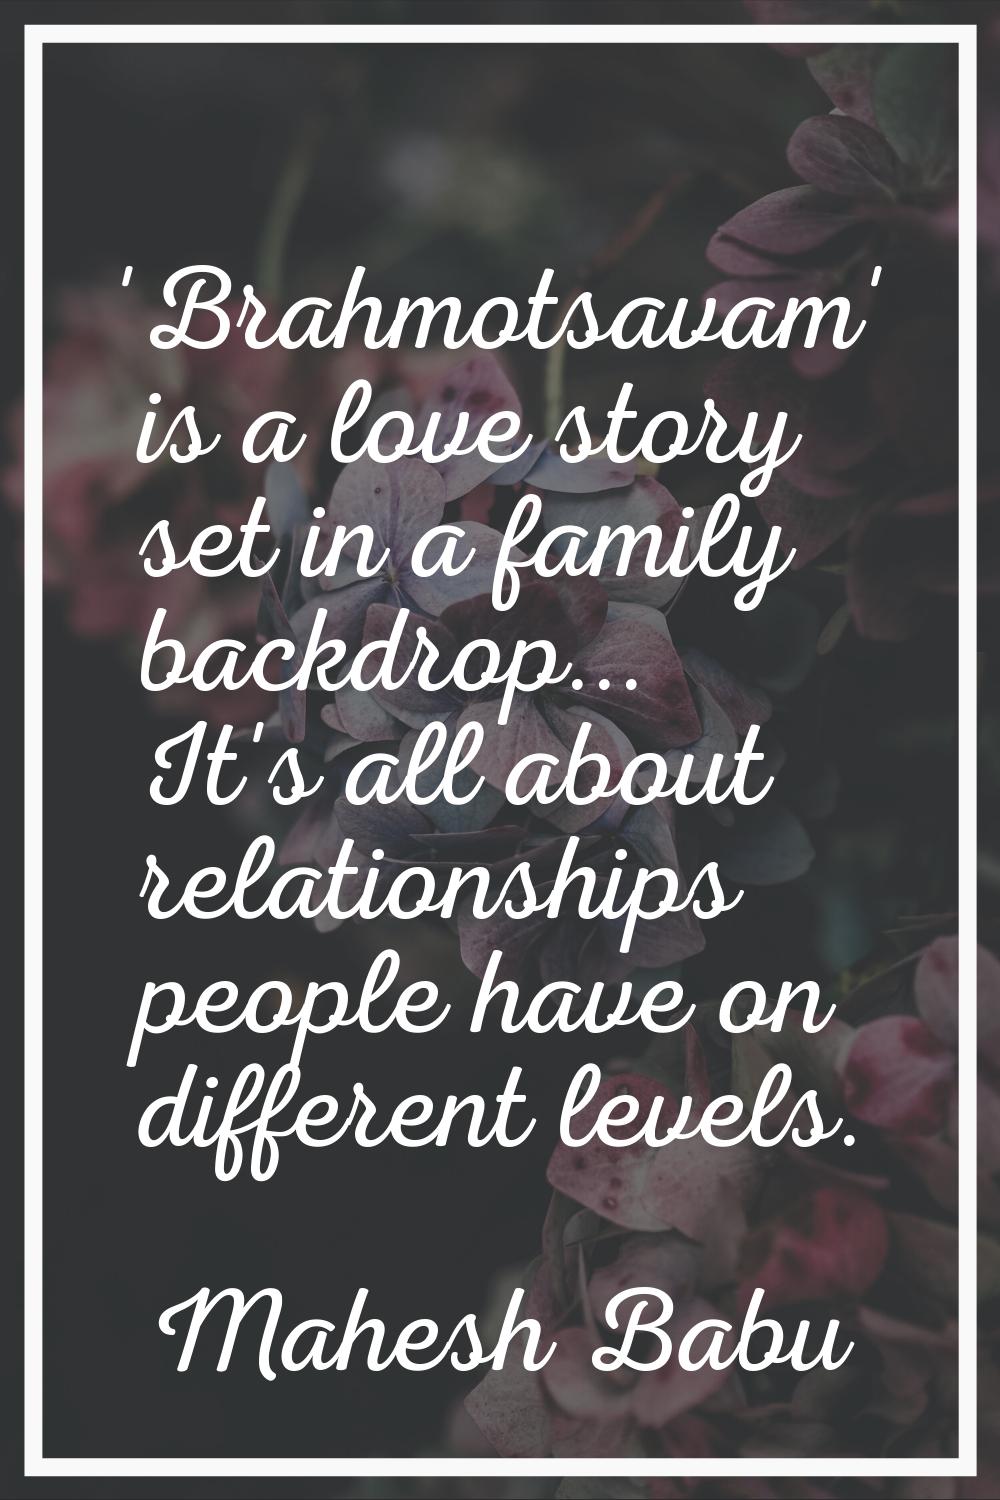 'Brahmotsavam' is a love story set in a family backdrop... It's all about relationships people have